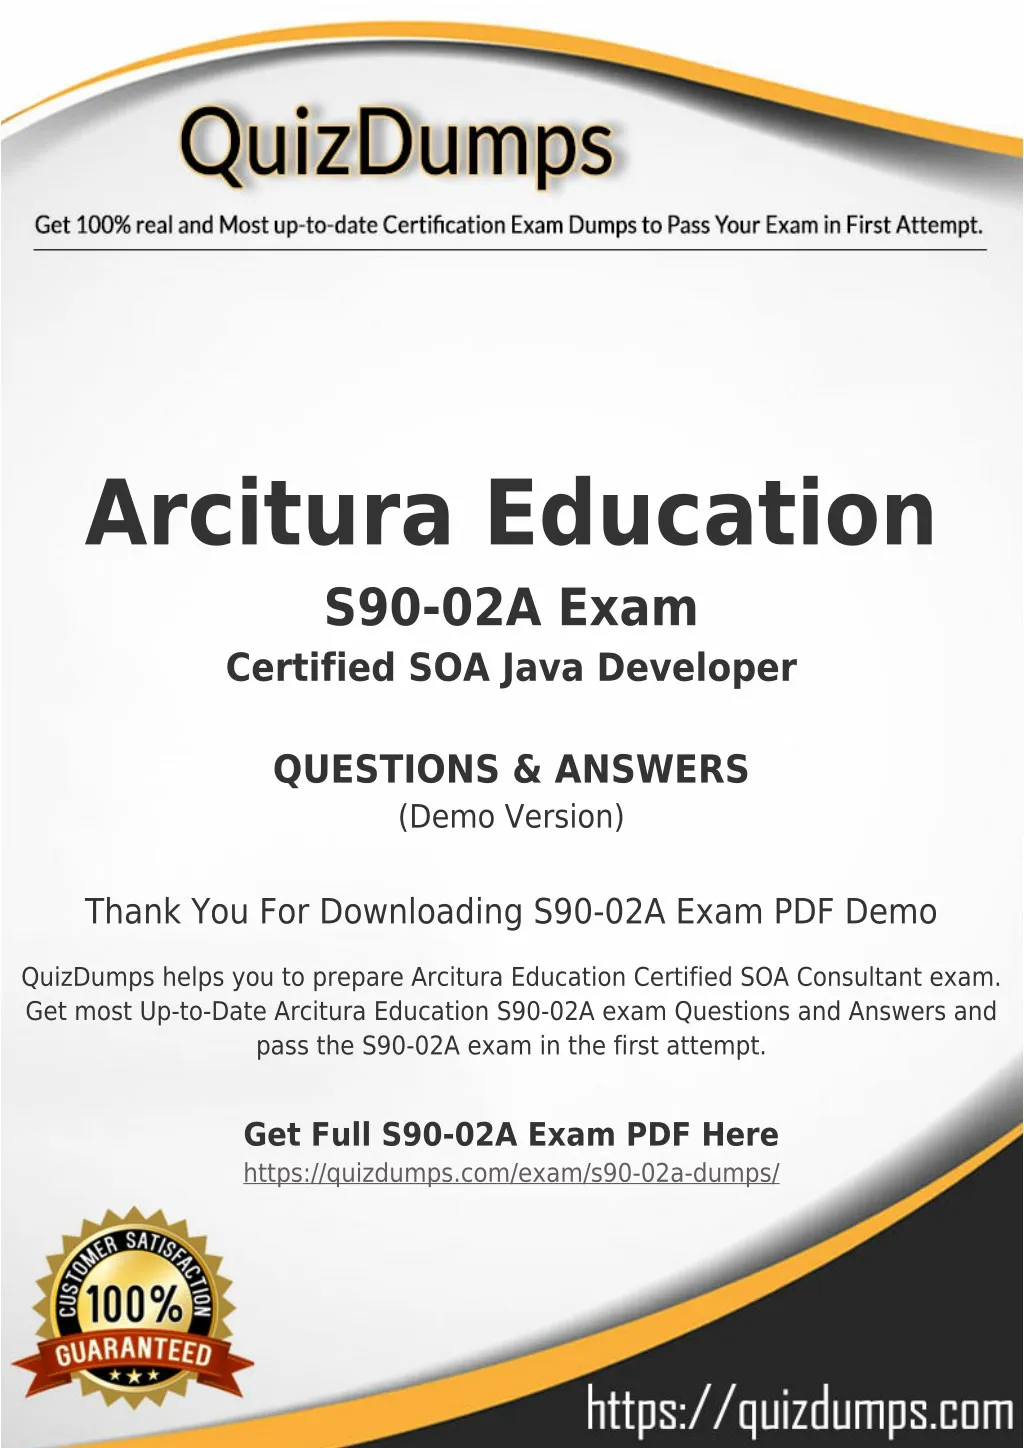 arcitura education s90 02a exam certified